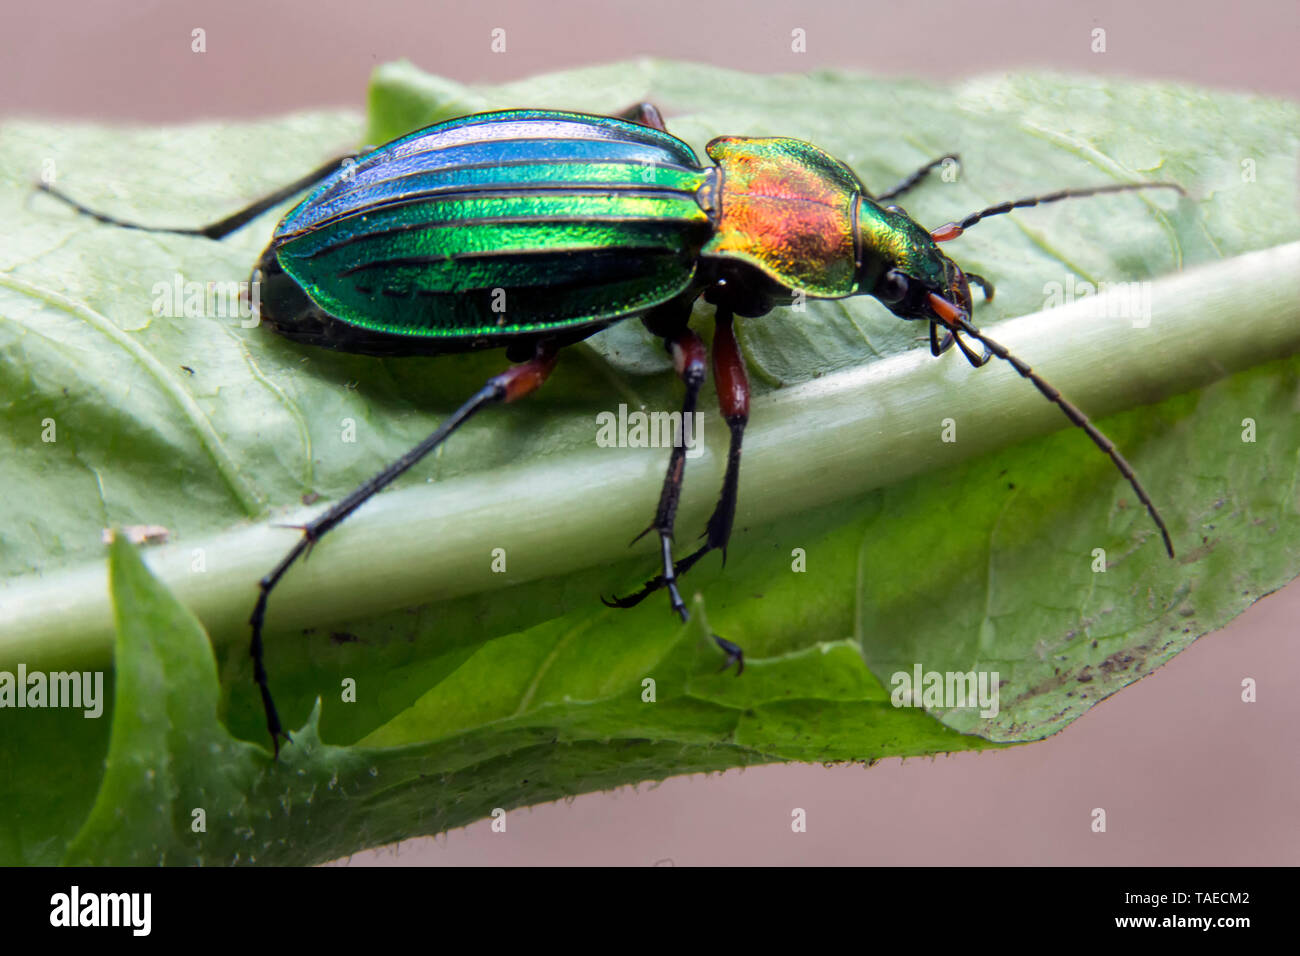 Ground beetle (Chrysocarabus auronitens) on a leaf at the edge of forest in the spring, Vicinity of Cransac, Aveyron, France Stock Photo